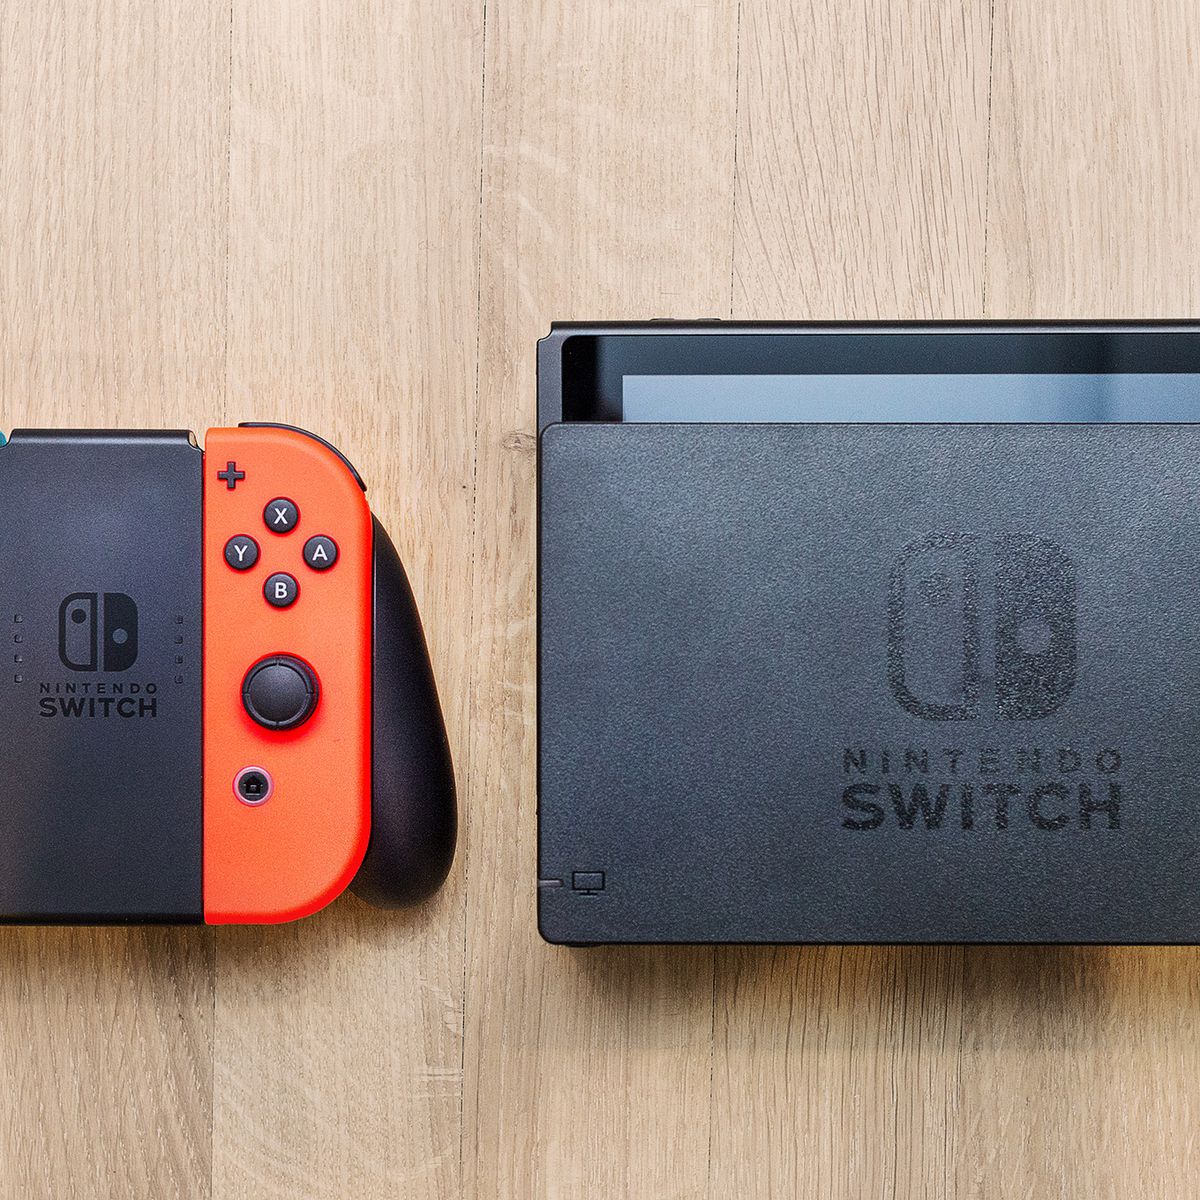 Nintendo Switch - Neon Red/Blue Joy-Cons in Joy-Con Grip next to Dock, all sitting on a wooden background